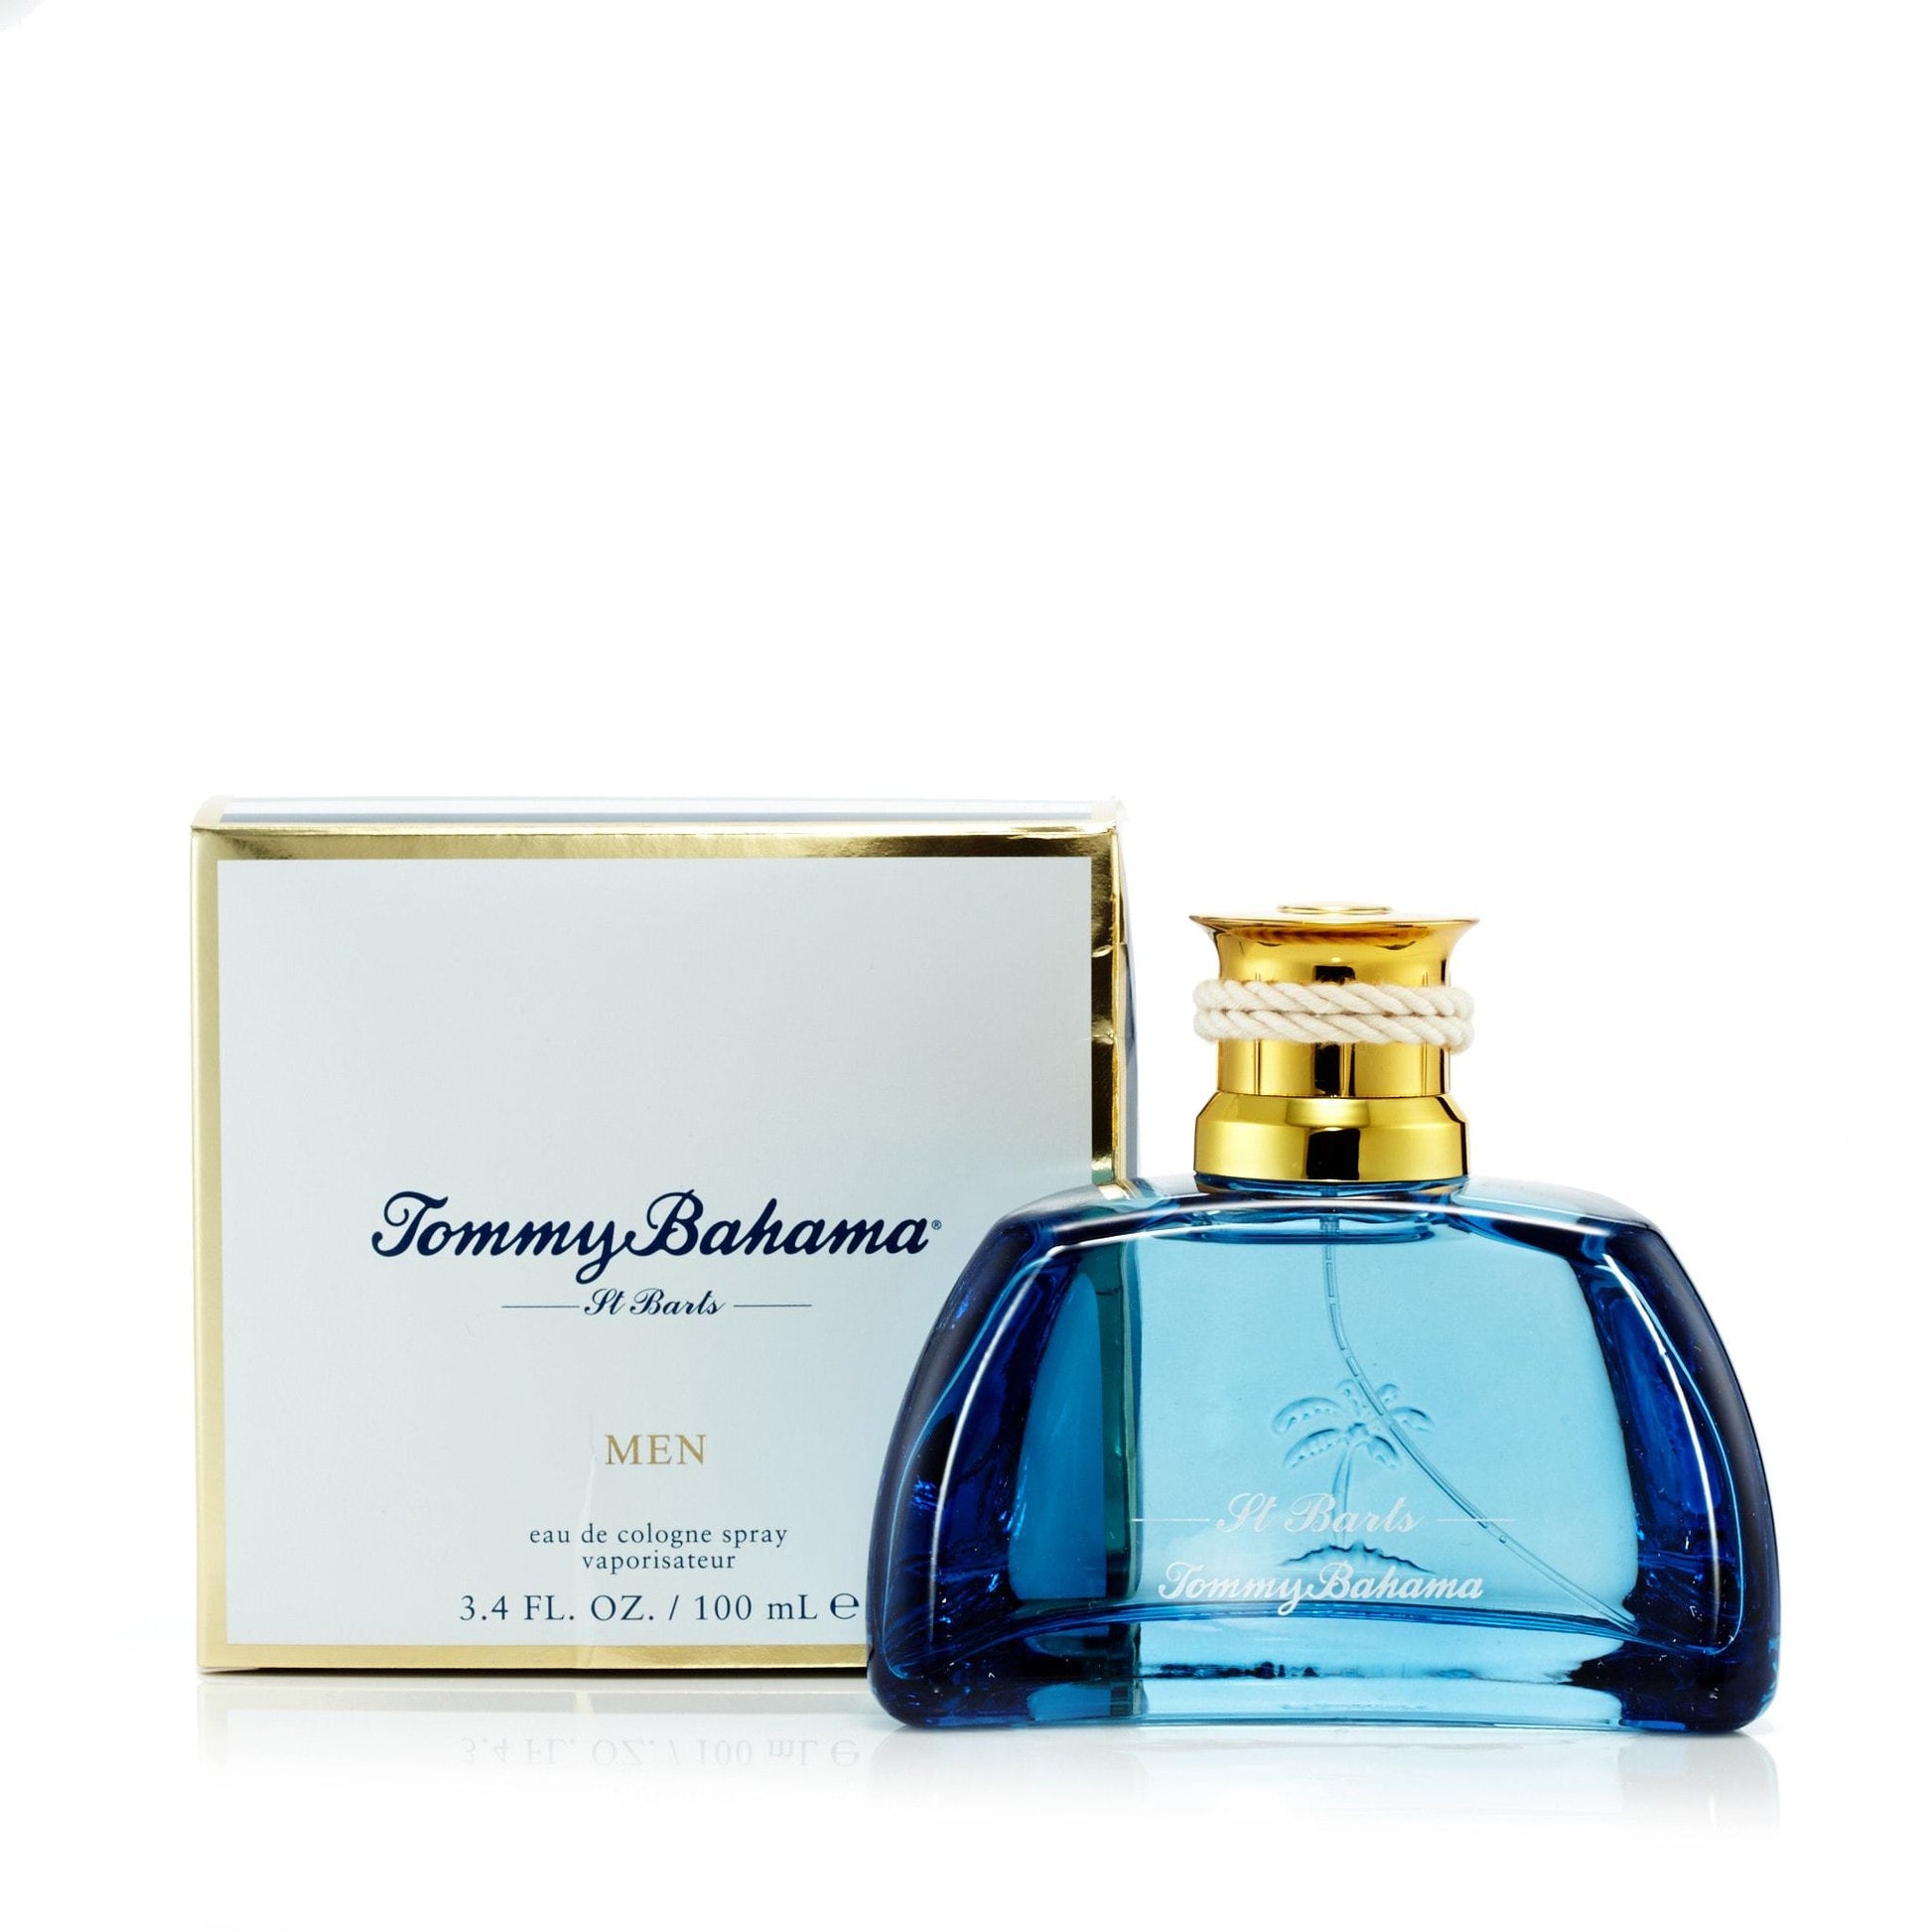 St. Barts Eau de Cologne Spray for Men by Tommy Bahama, Product image 2